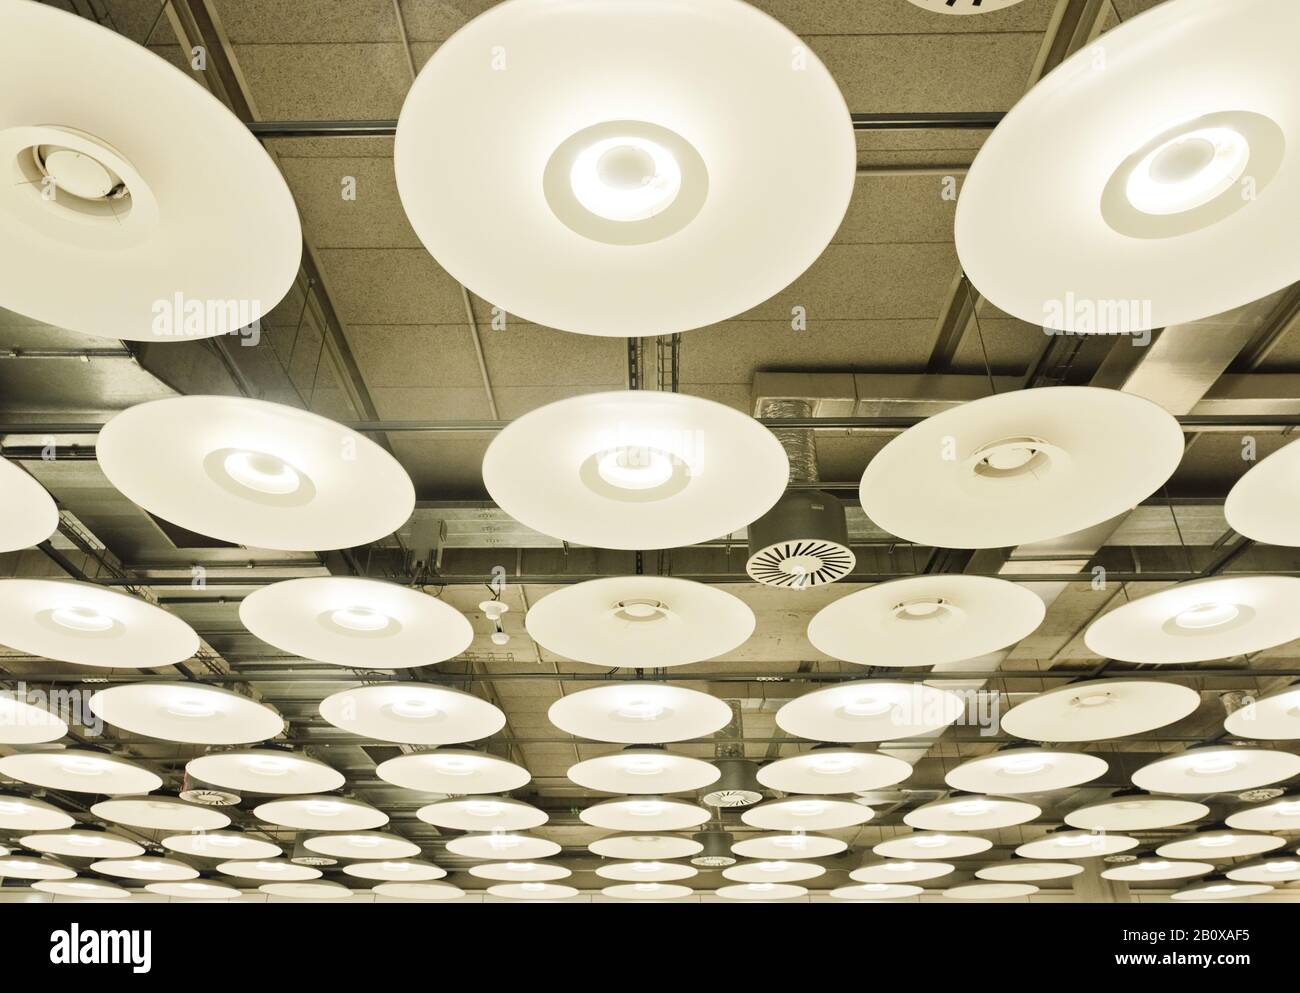 Lamps inside the Barajas Airport, Terminal 4, Madrid, Spain, Stock Photo